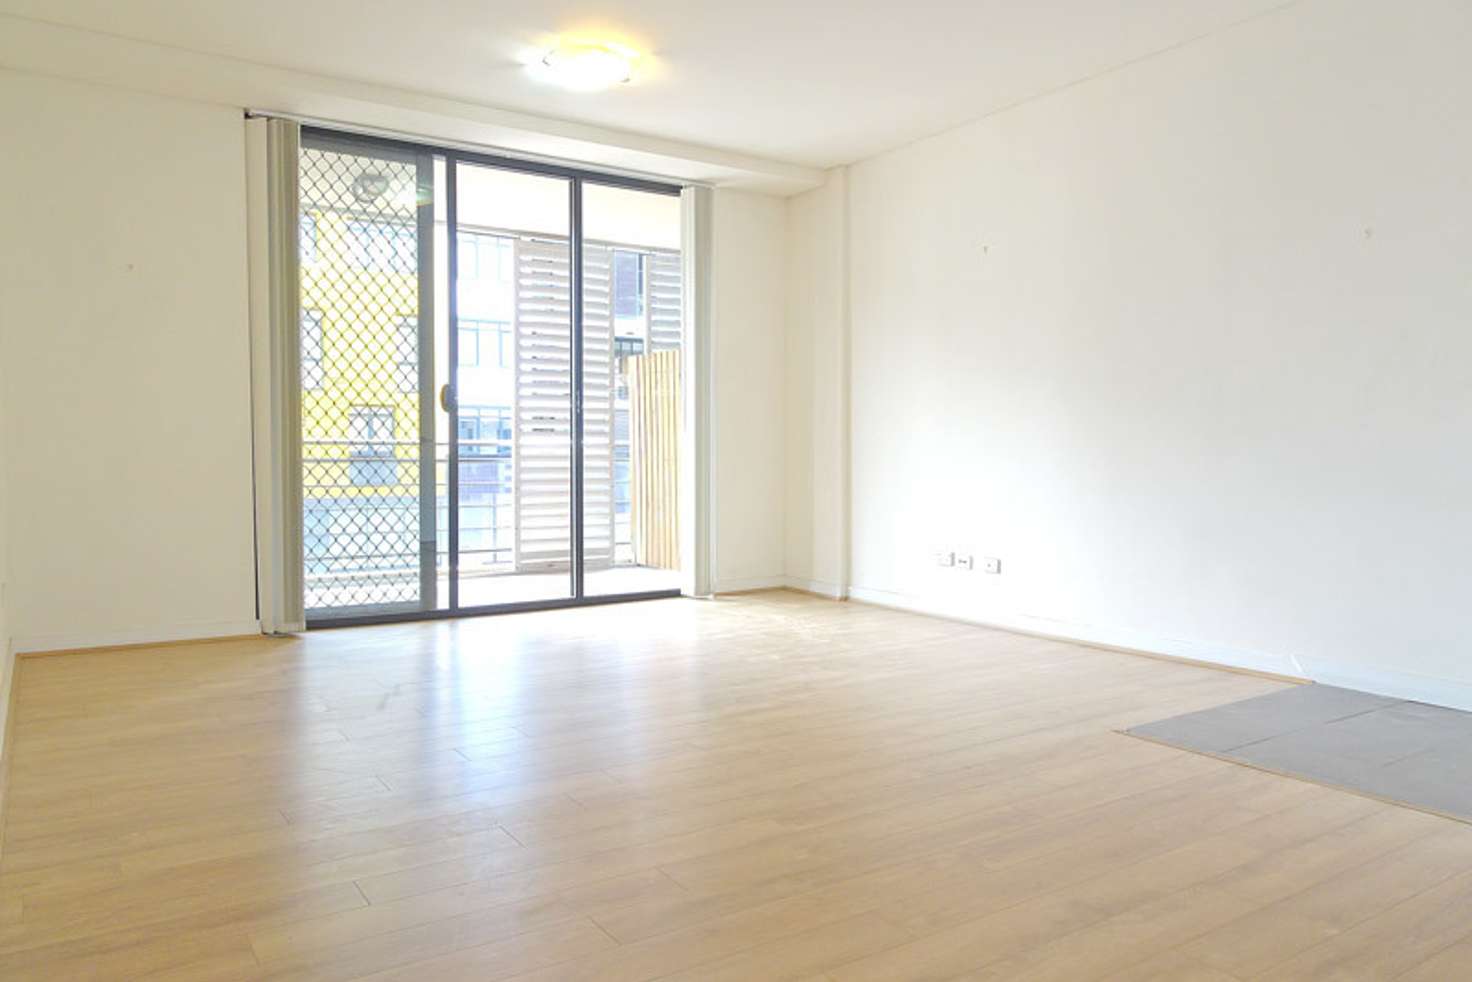 Main view of Homely apartment listing, 5128/84 Belmore St, Ryde NSW 2112